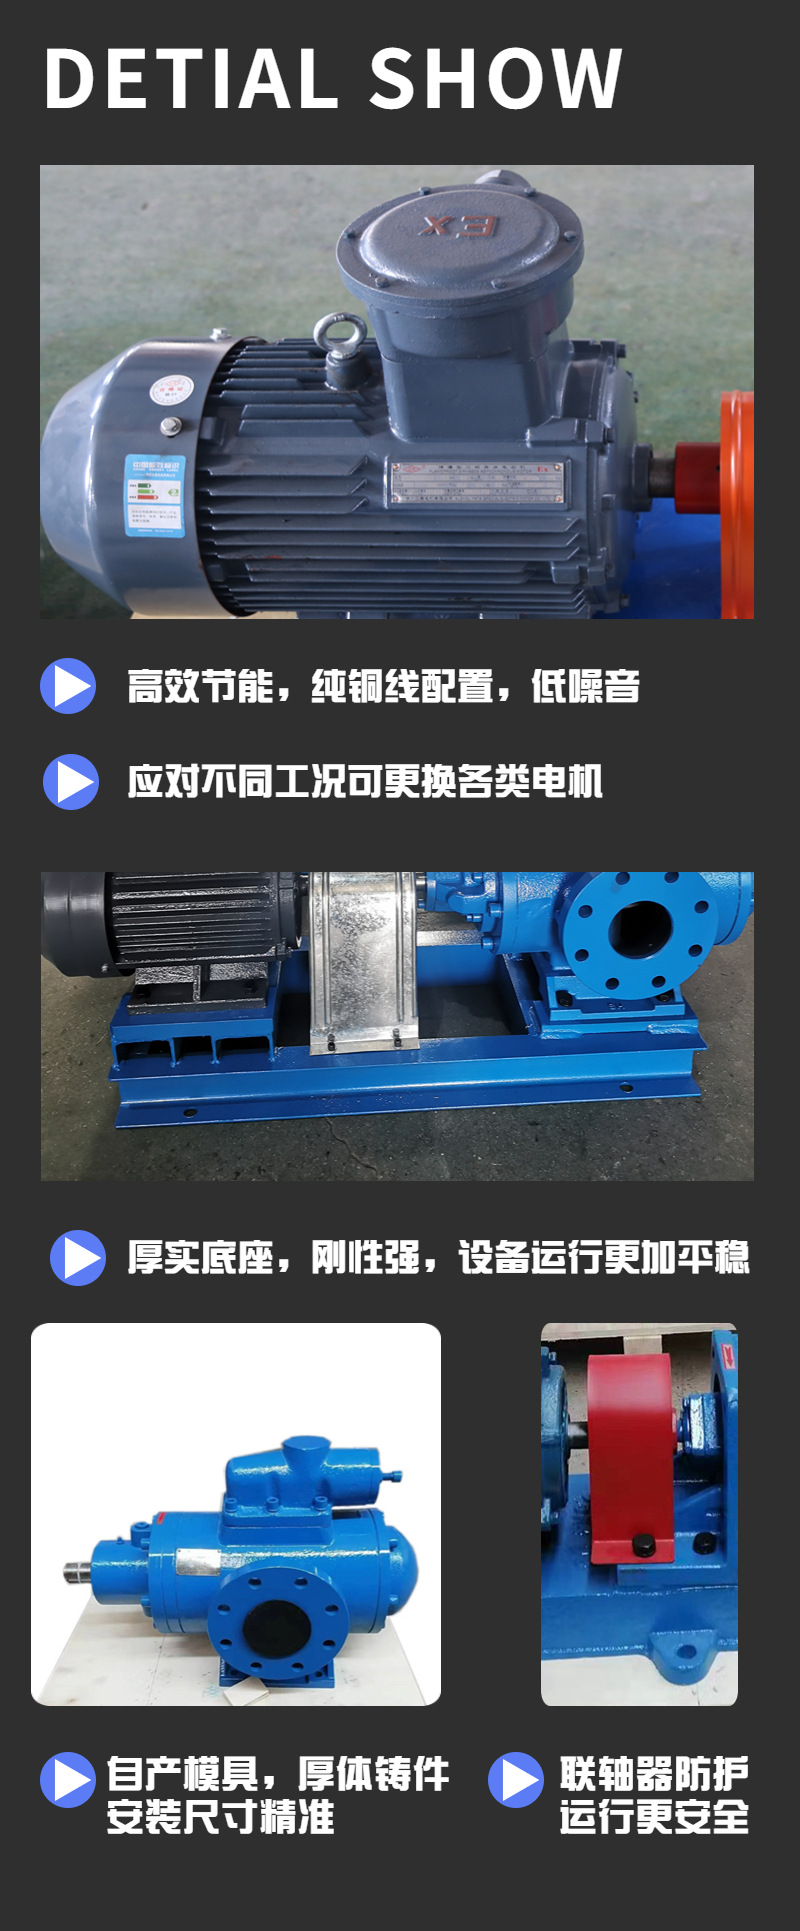 Production of SN Three Screw Pump Oil Field Oil Delivery Pump Lubricating Oil Spiral Pump Heavy Oil Pump